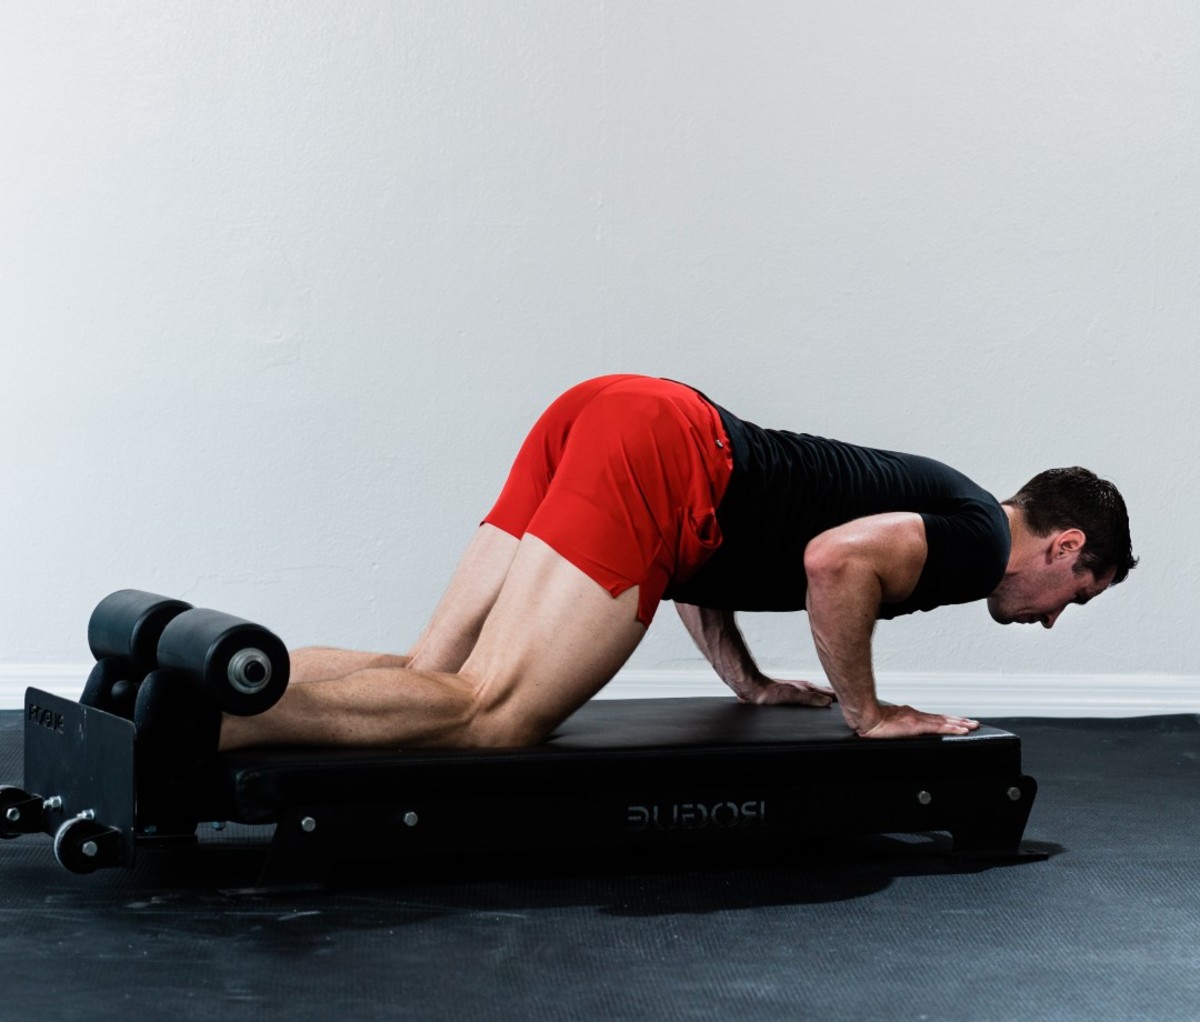 Caucasian man in black T-shirt and red shorts doing Nordic hamstring curl